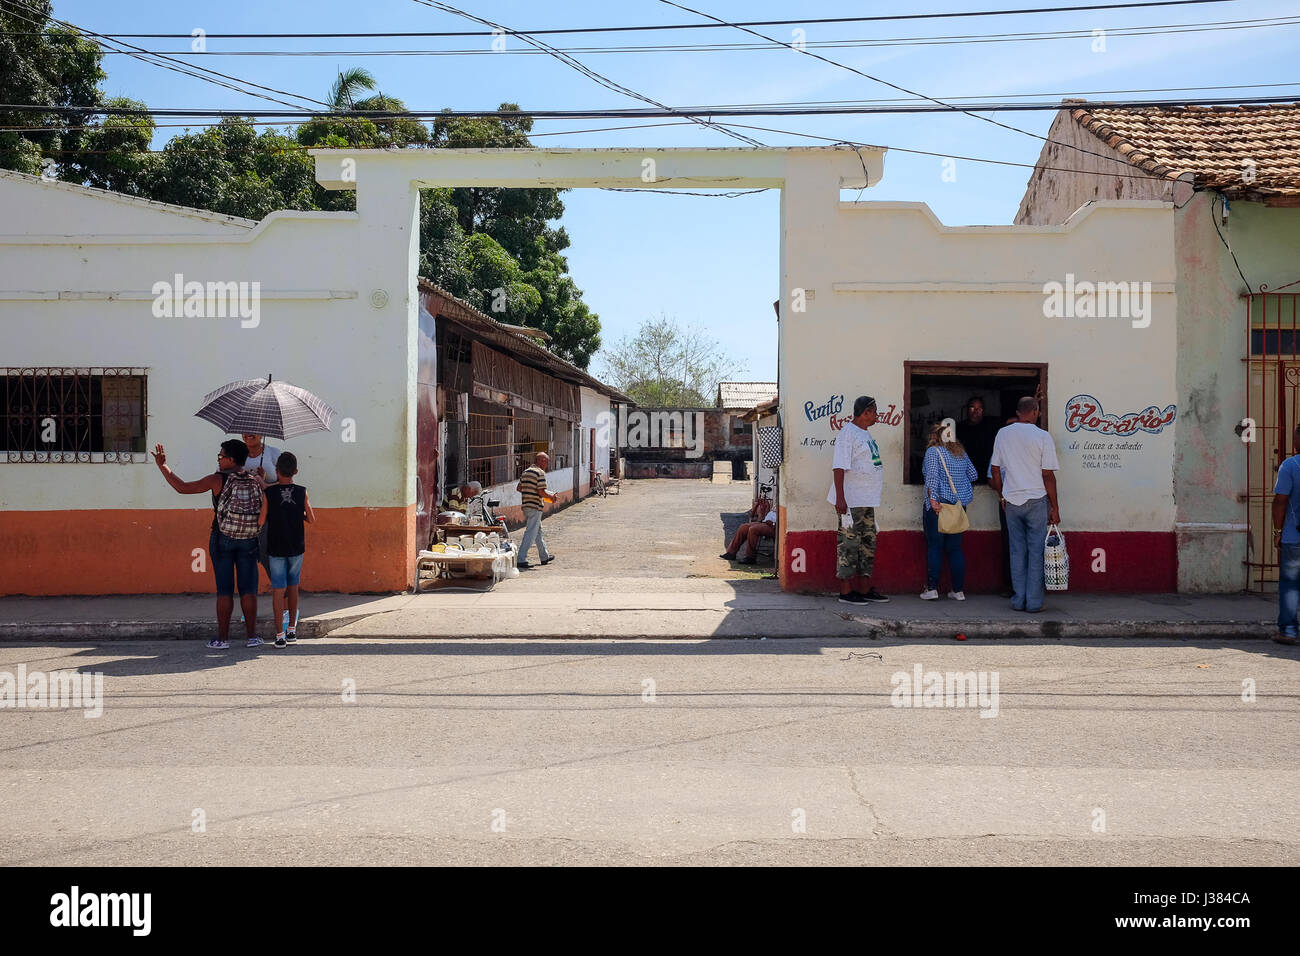 Local people grocery shopping in Trinidad, Cuba Stock Photo